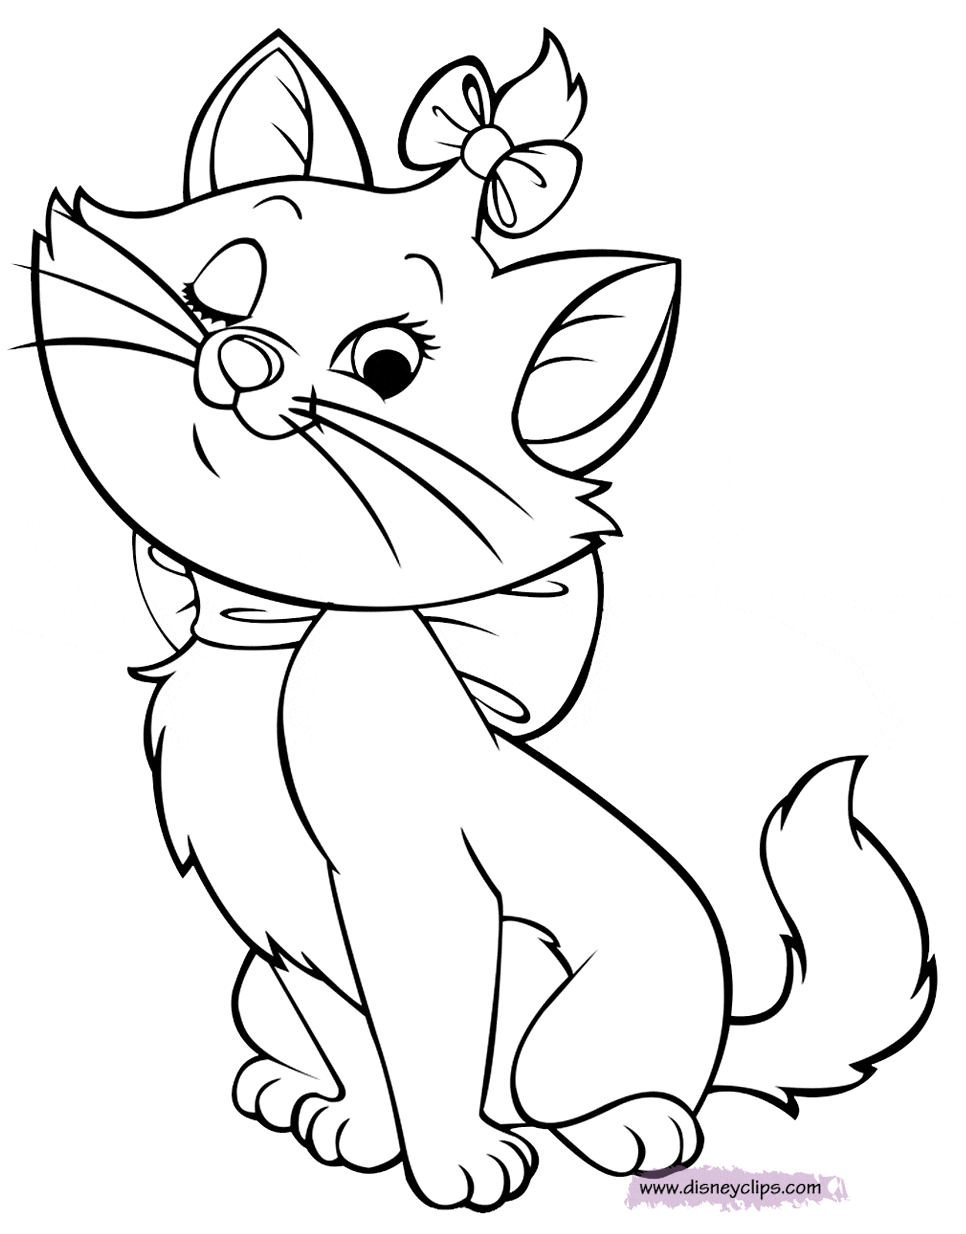 Marie winking Coloring Page